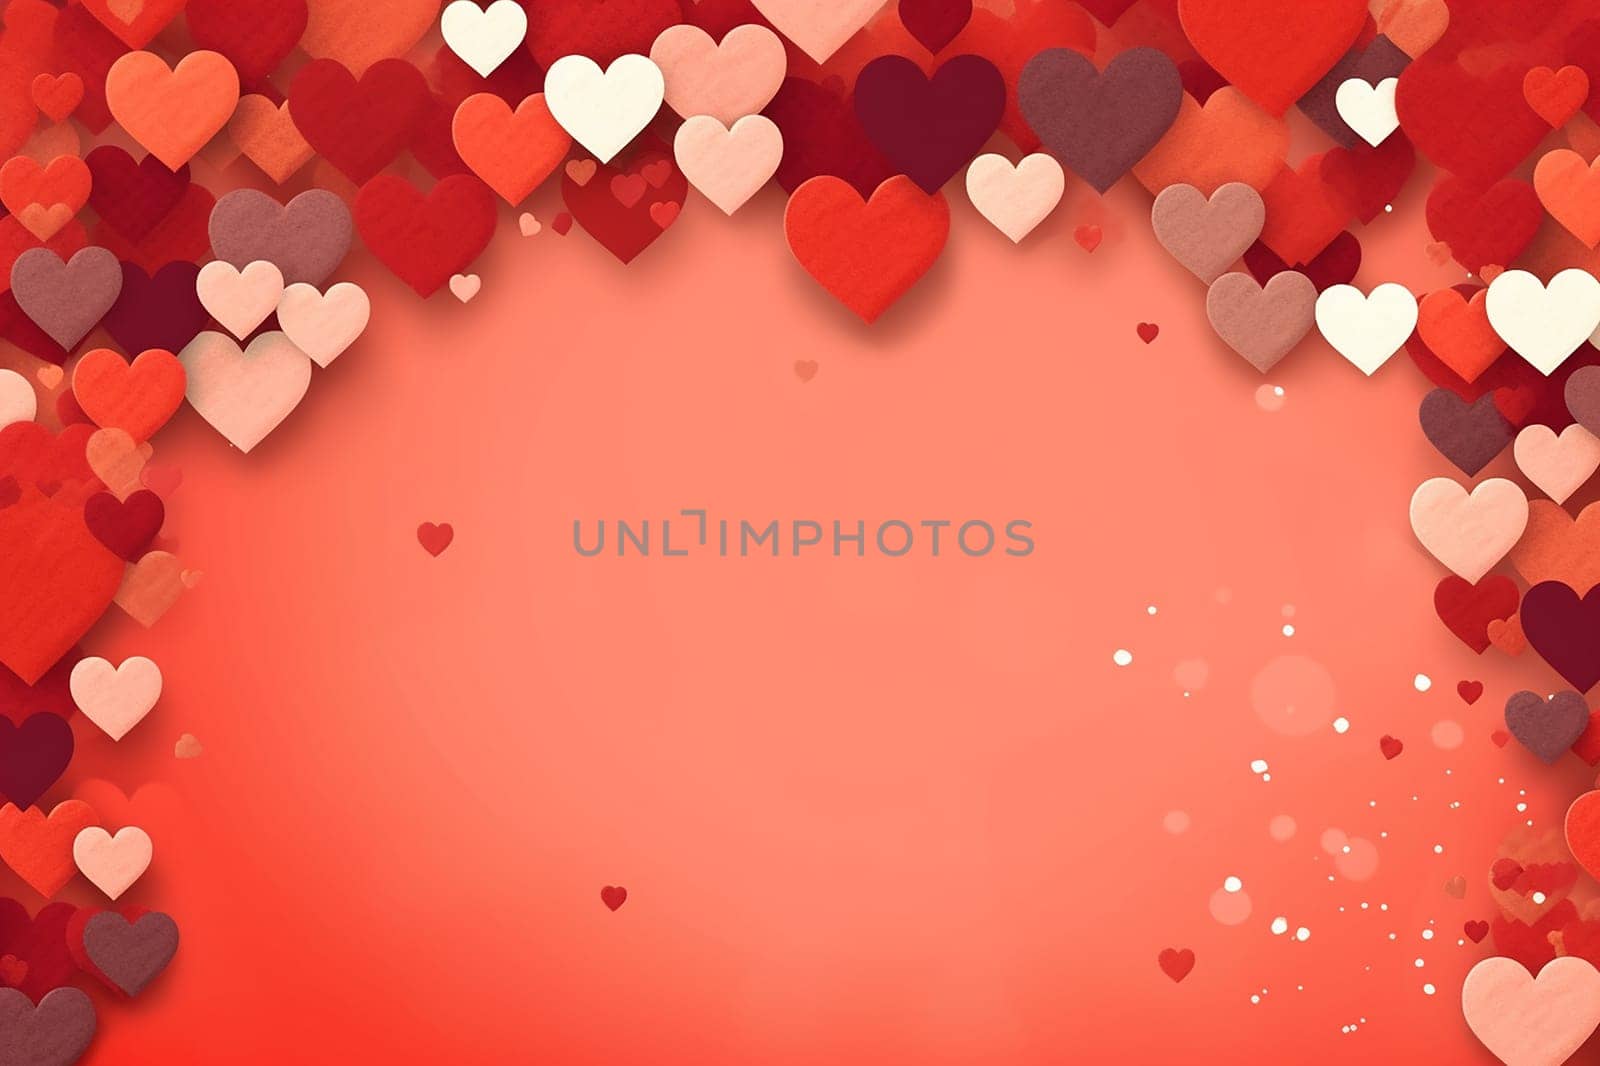 Various red and white hearts on a gradient red background, representing love and Valentine's Day. by Hype2art